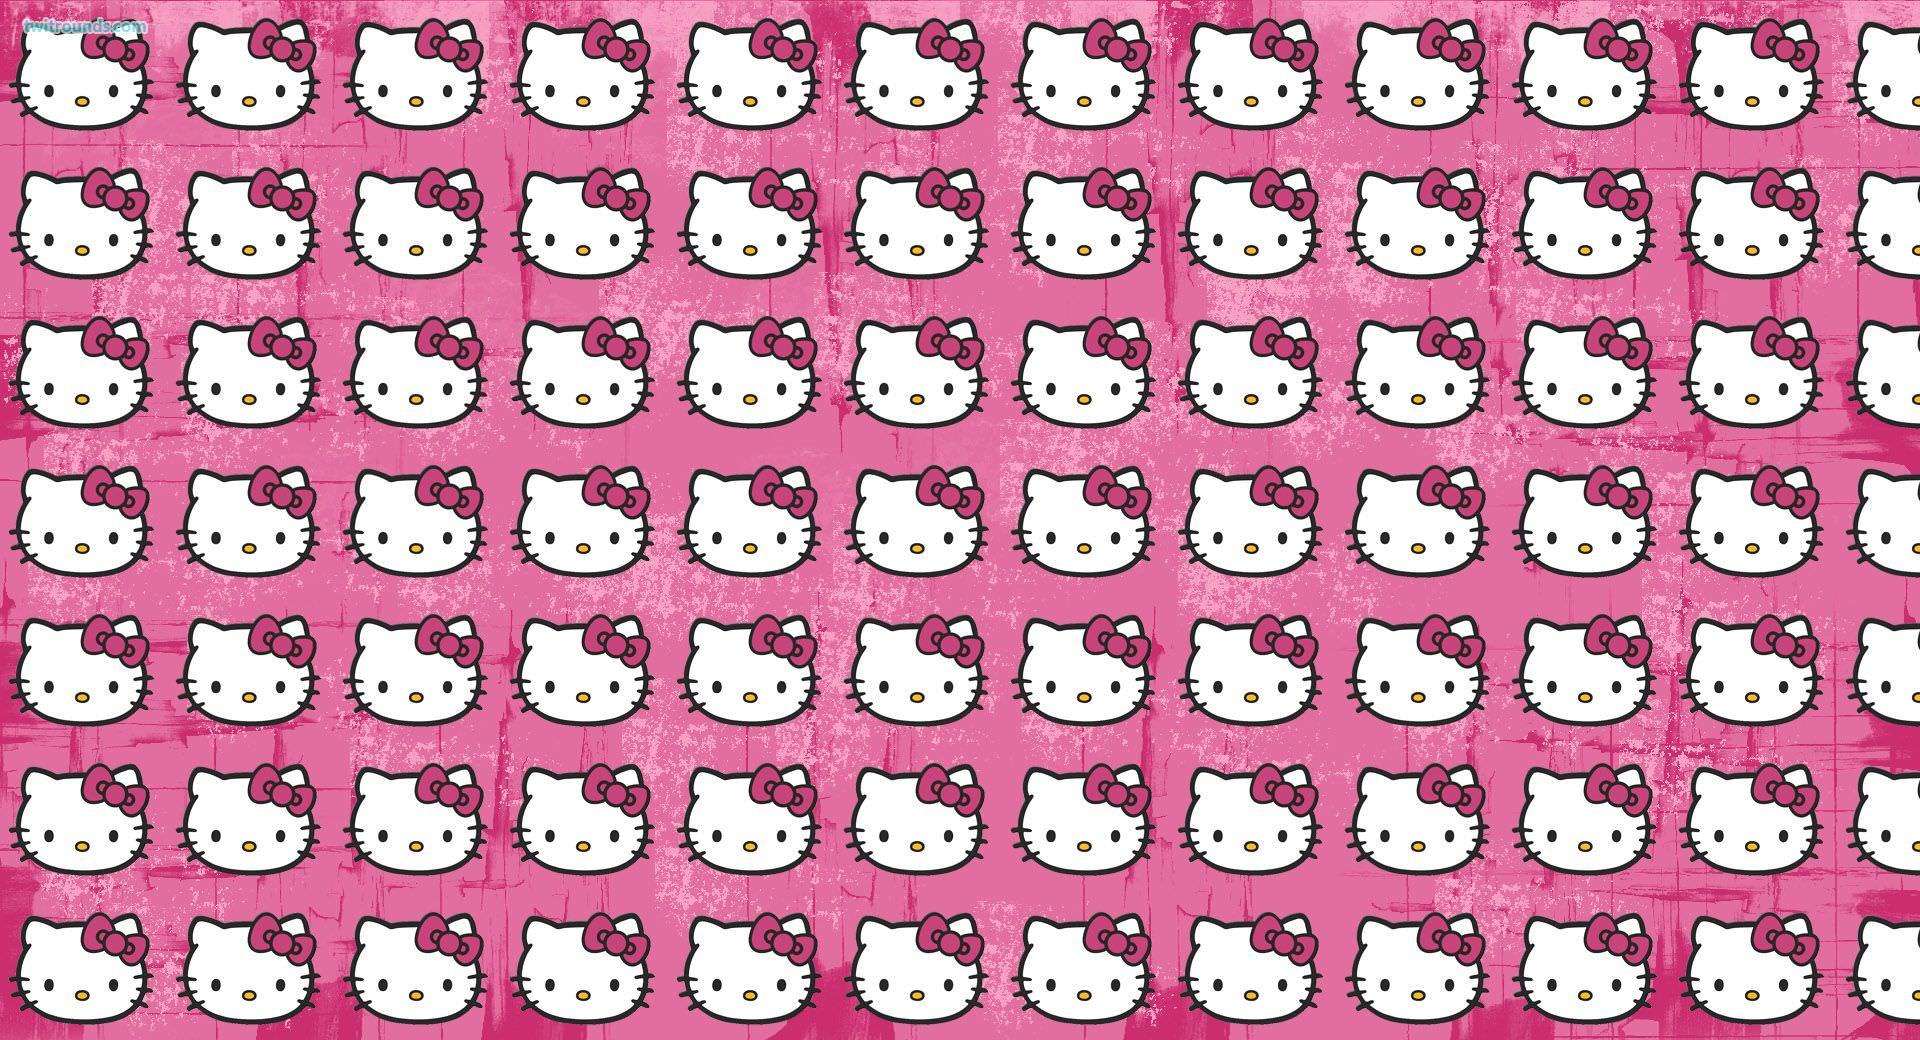 Hello Kitty Wallpaper Pink And Black Love (Picture)